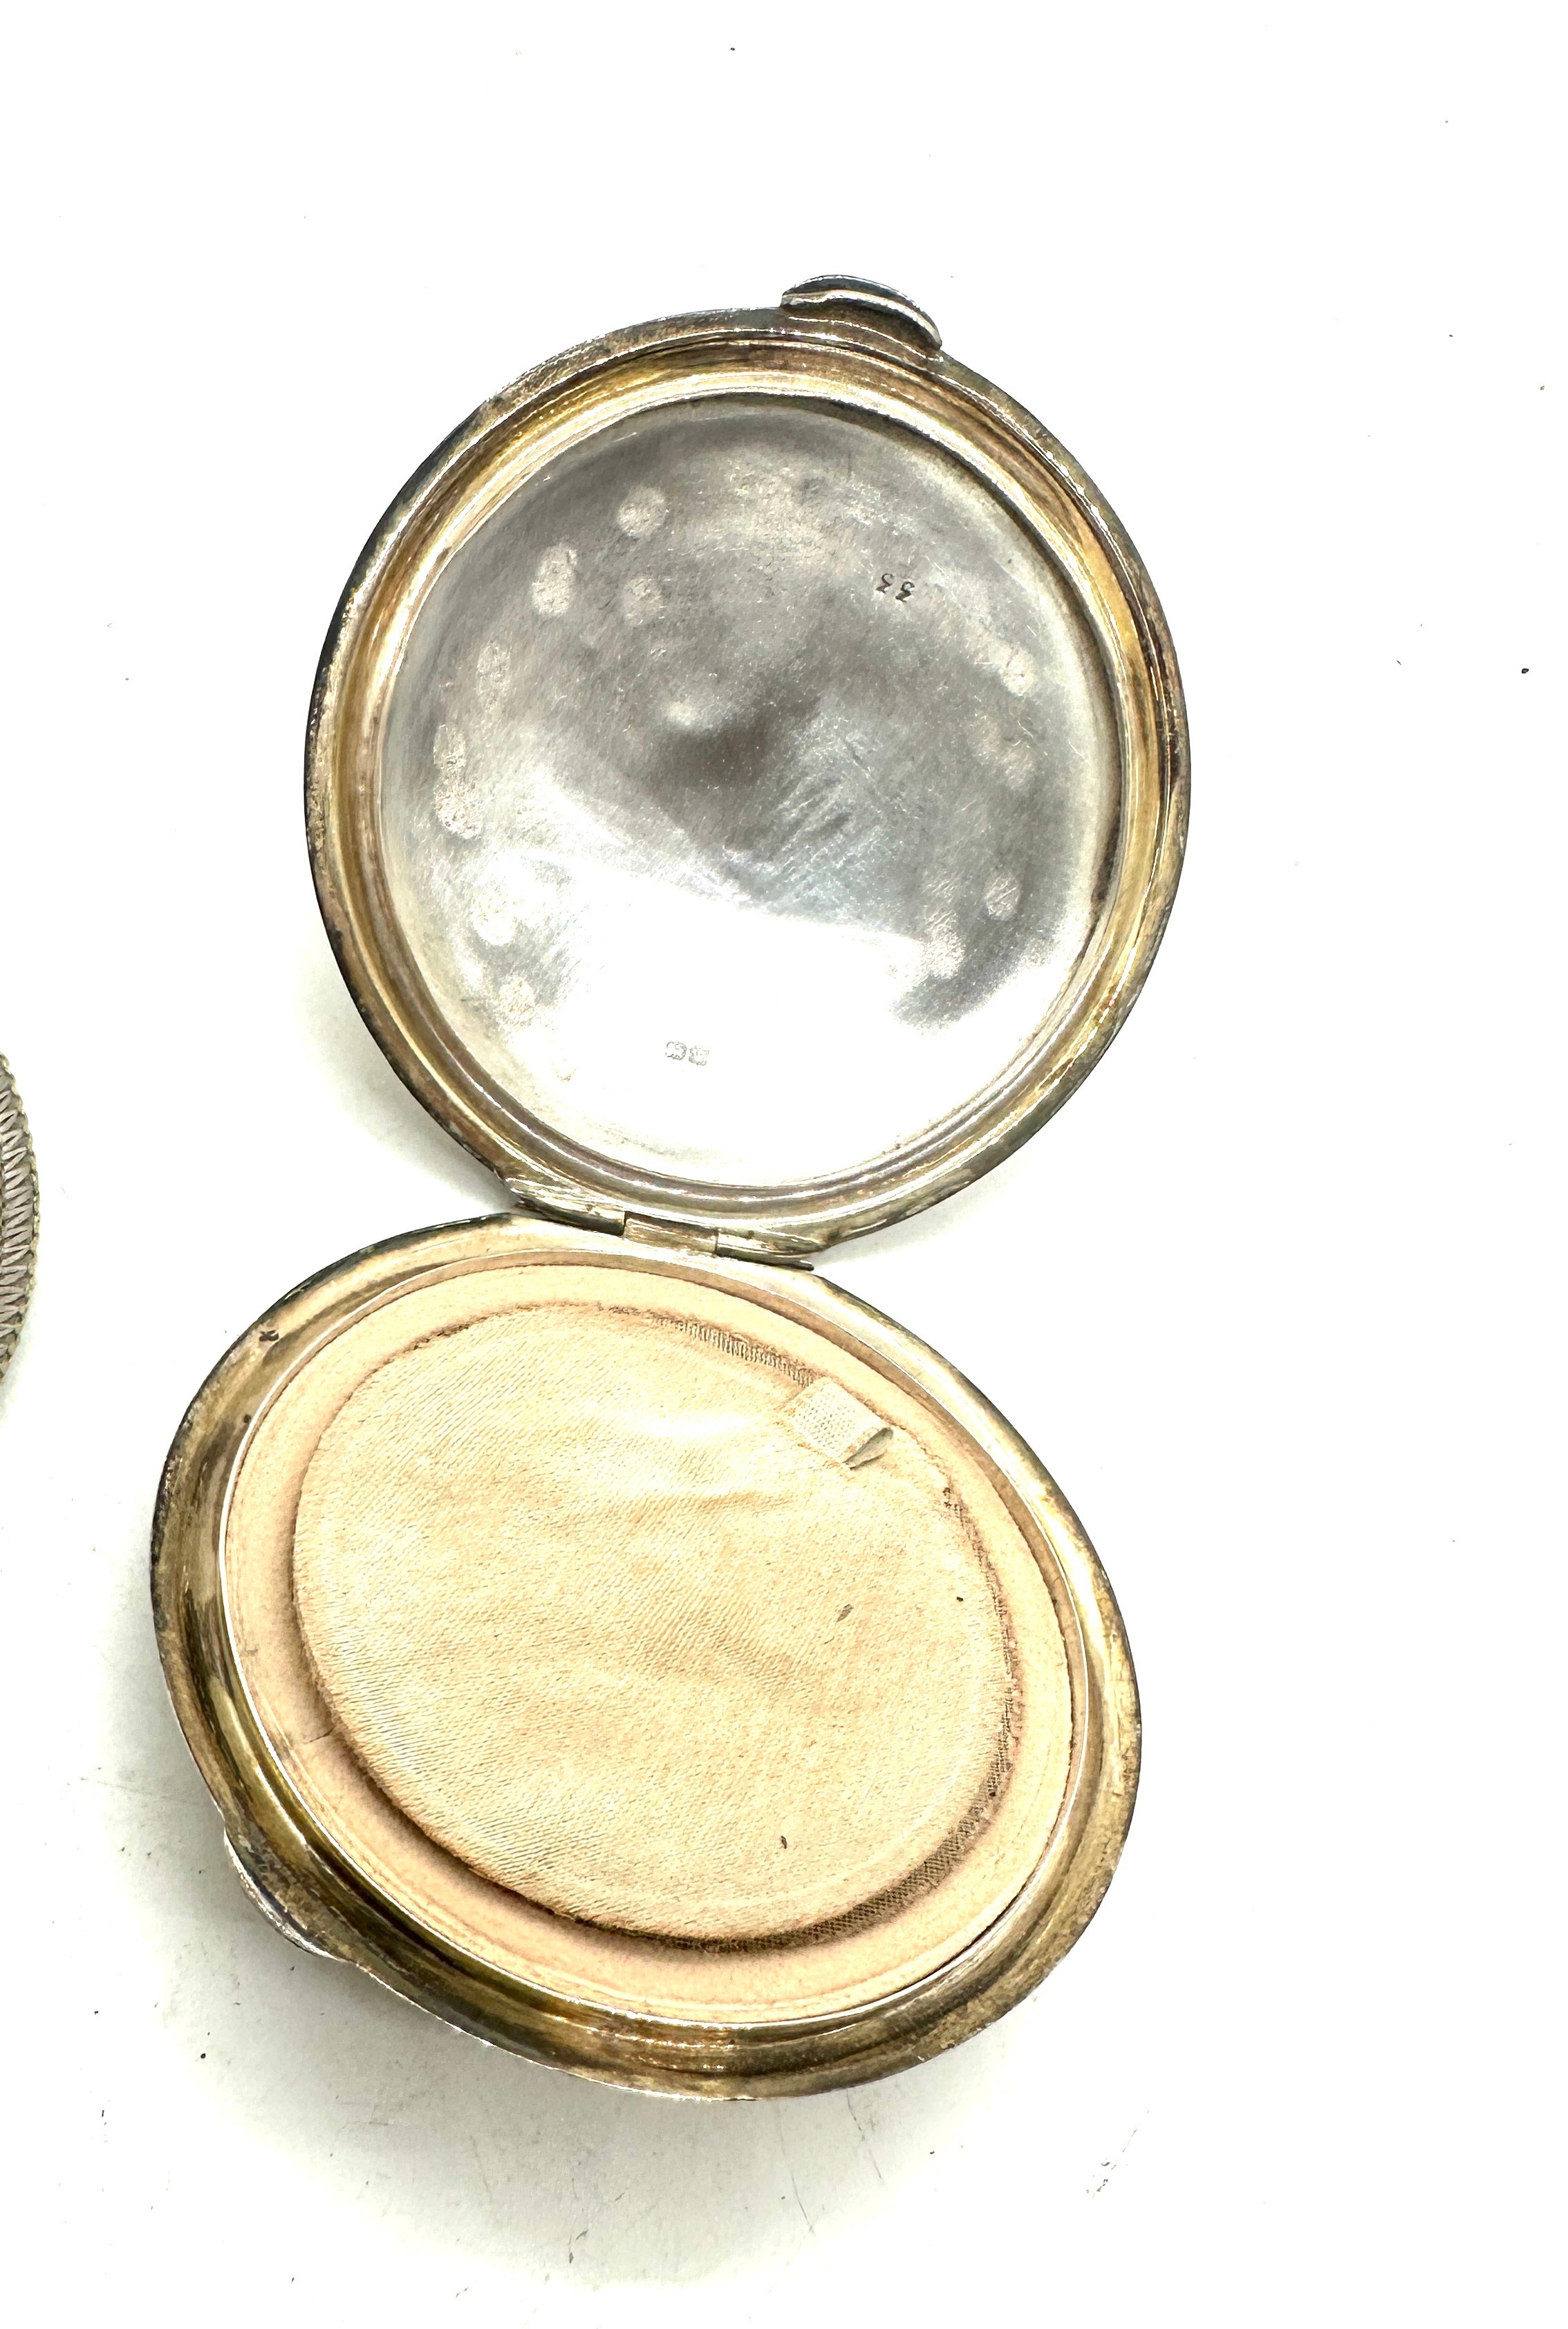 Silver compact case - Image 3 of 4